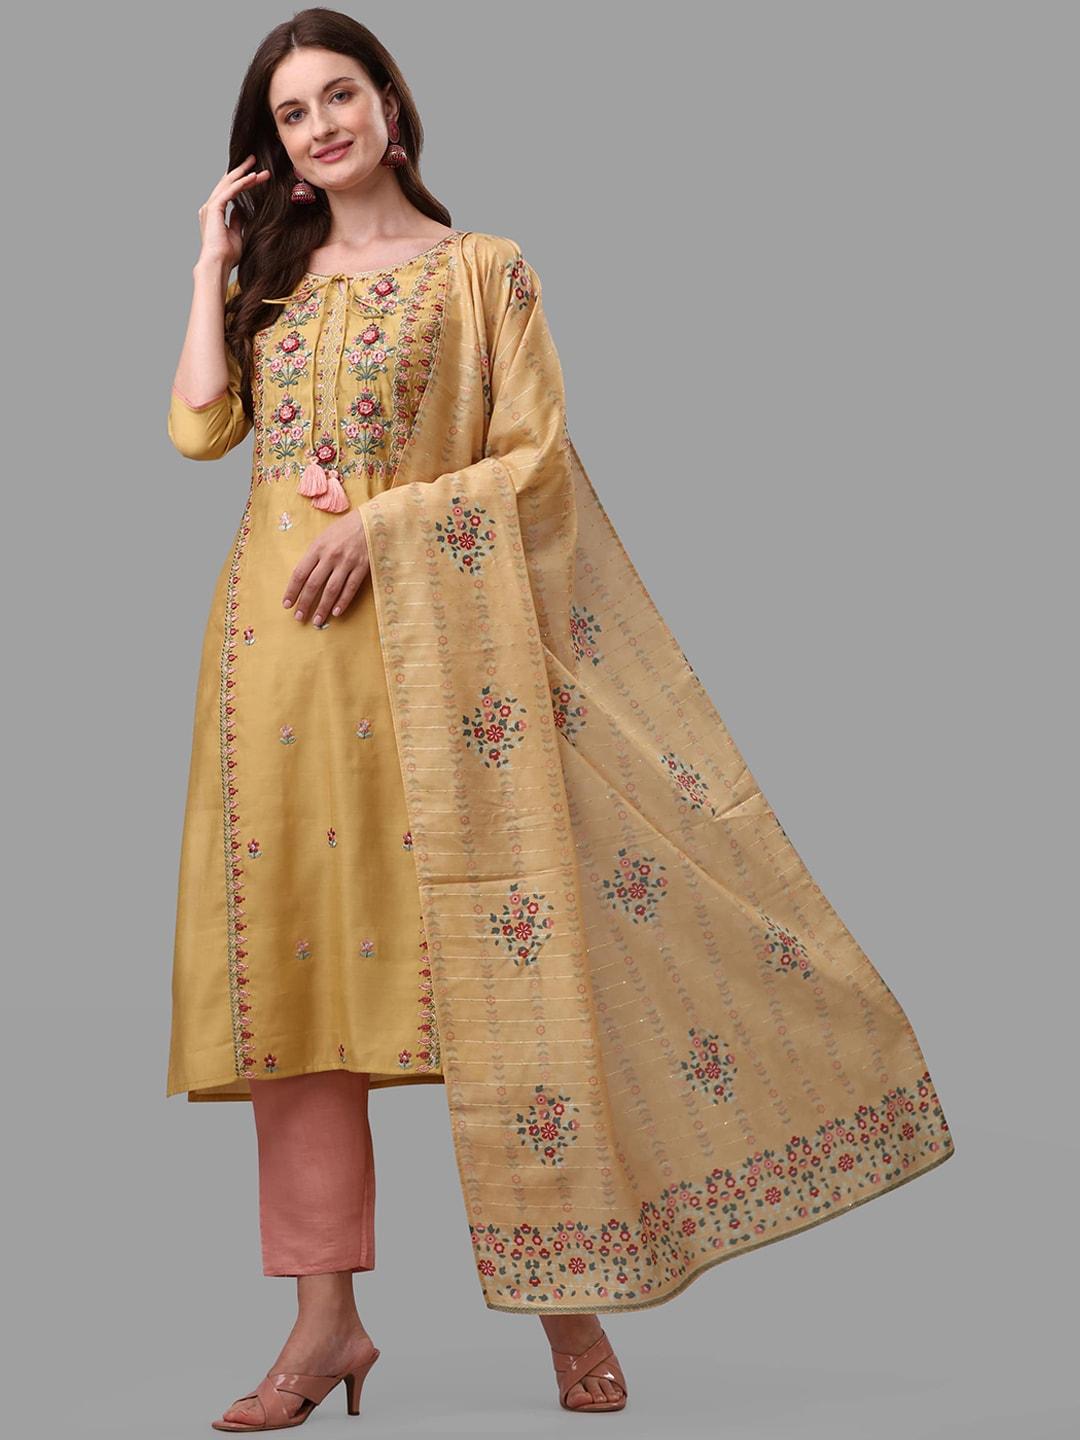 berrylicious-women-yellow-floral-embroidered-thread-work-chanderi-cotton-kurta-with-trousers-&-with-dupatta